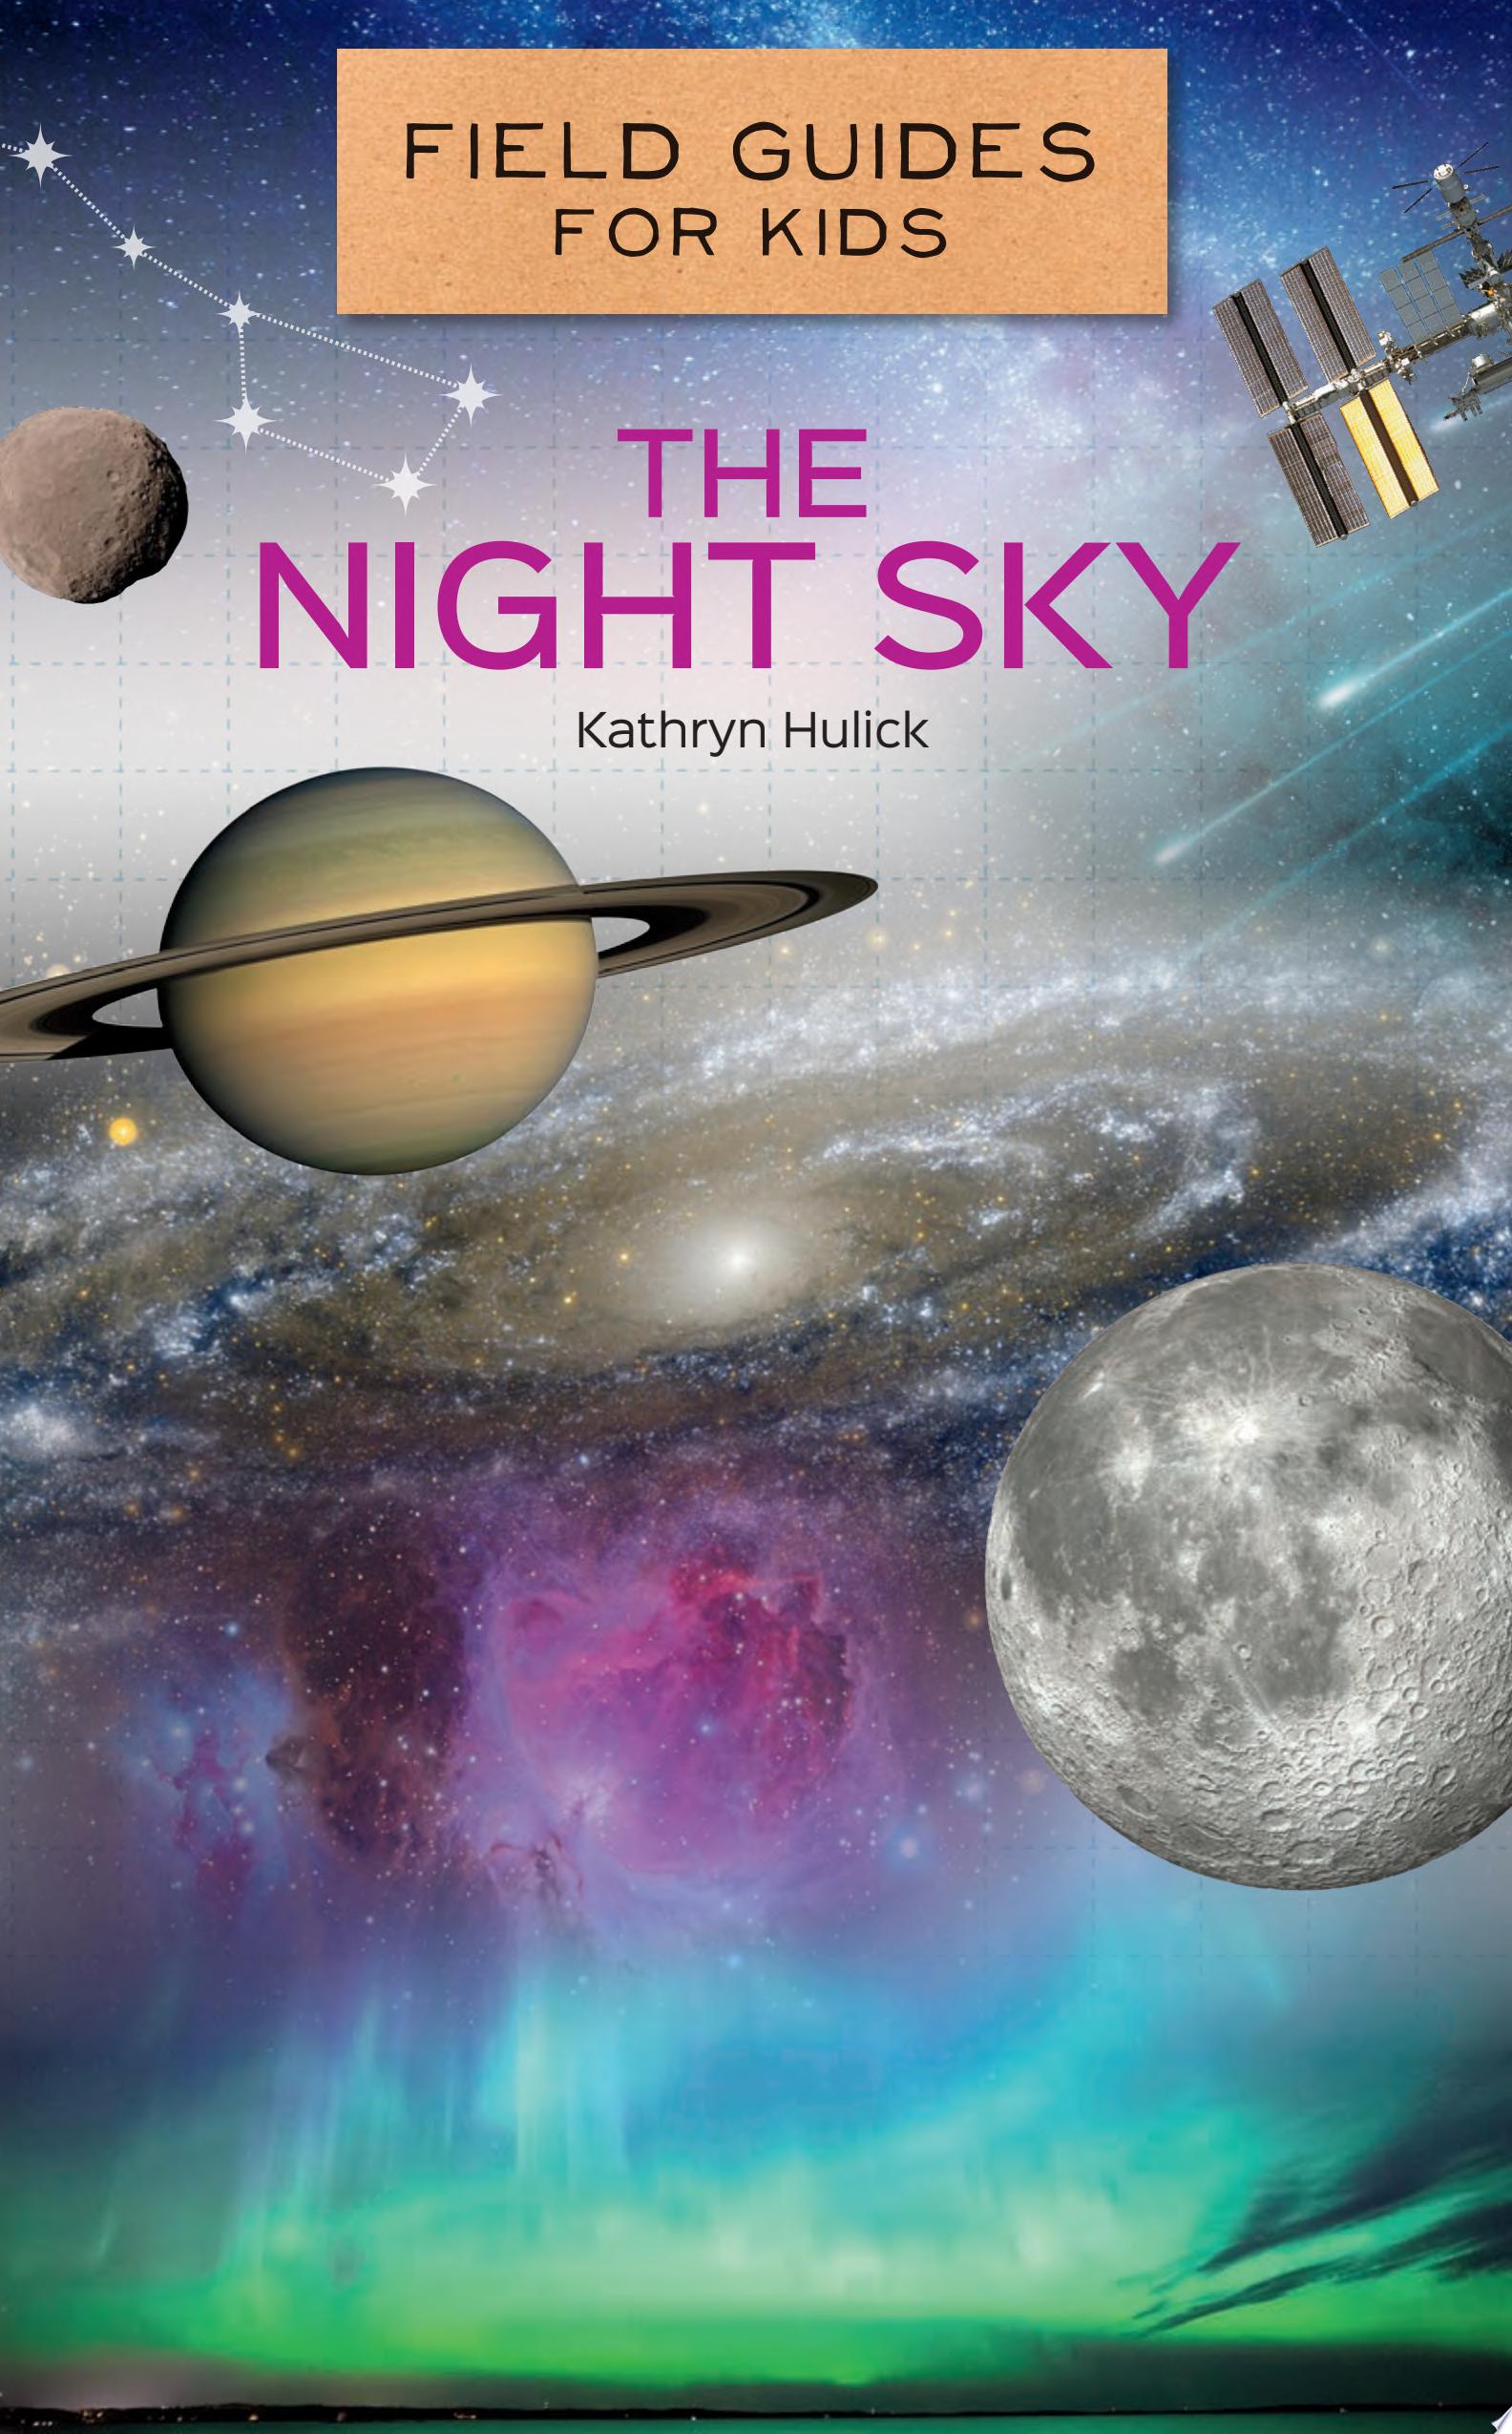 Image for "The Night Sky"